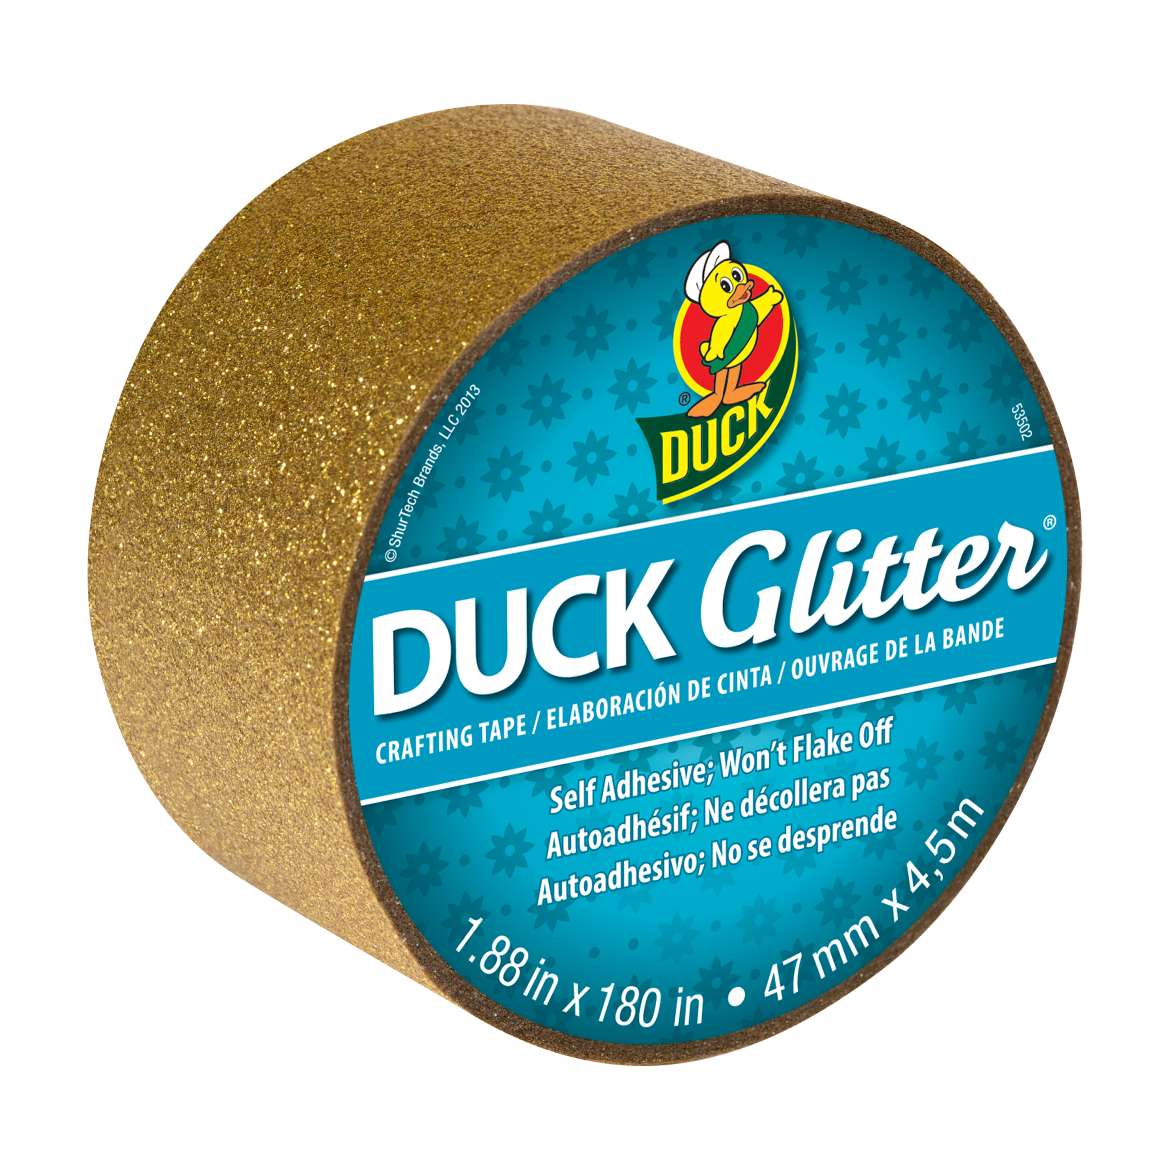 Duck Glitter® Crafting Tape Image